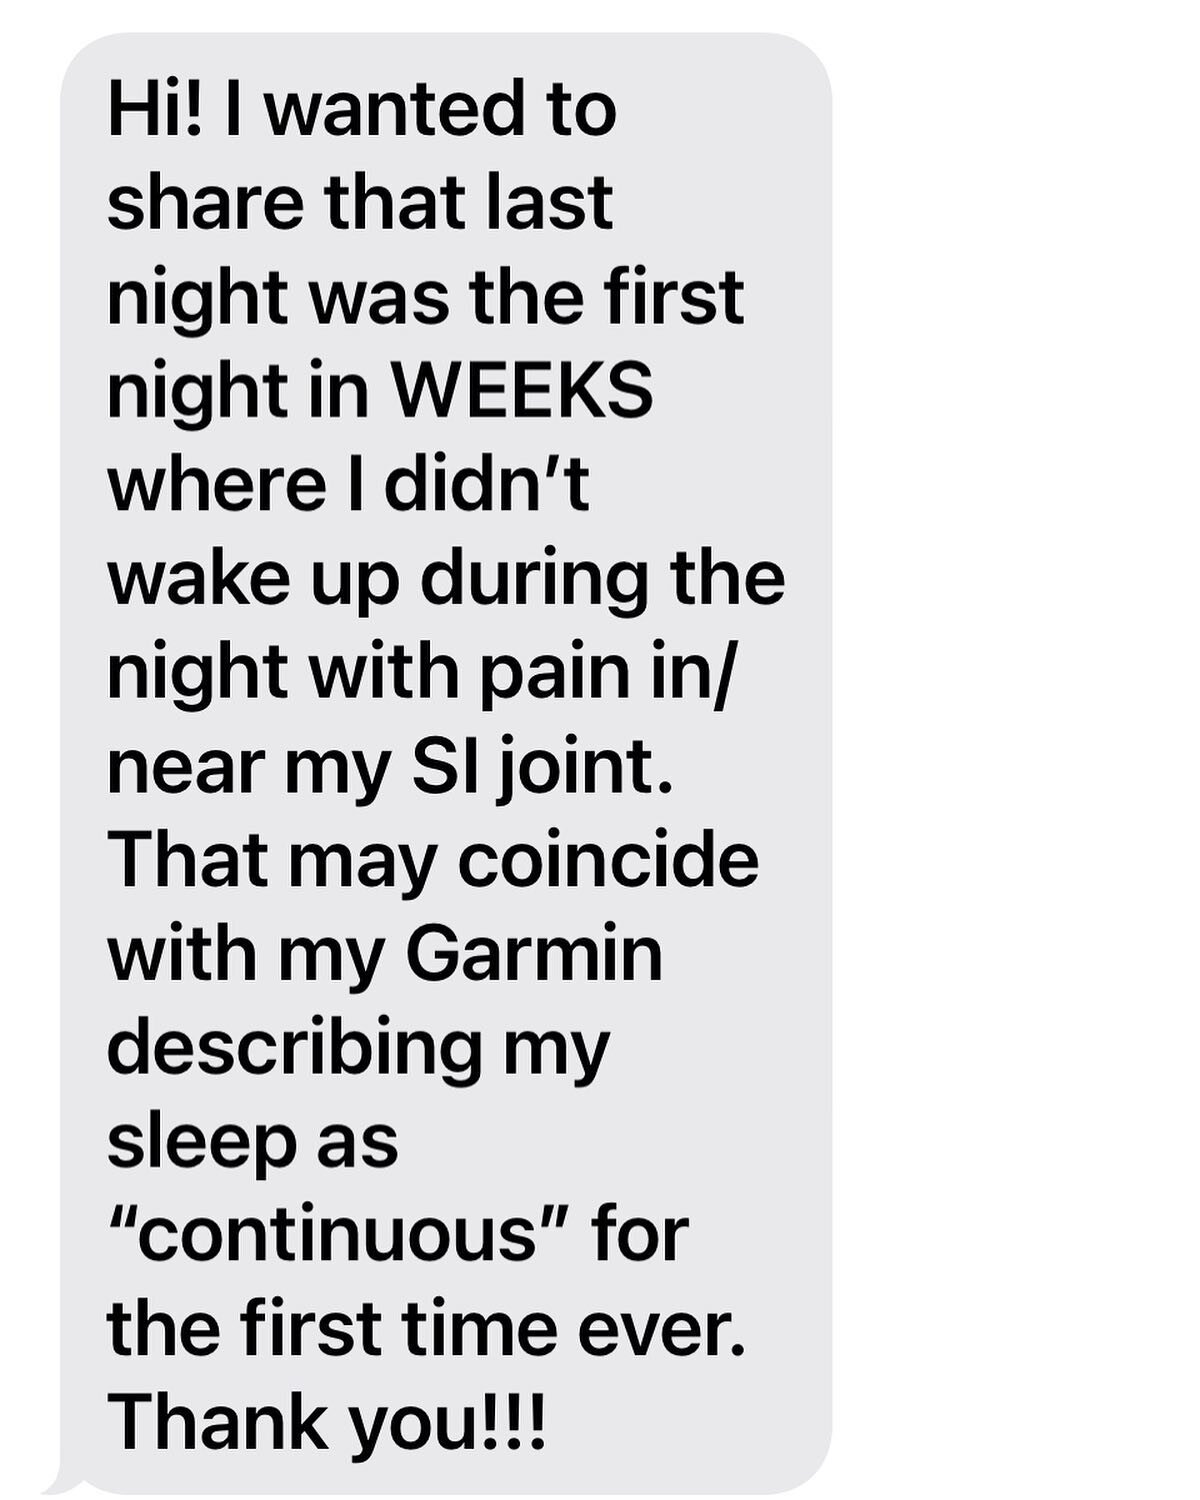 We are always so happy to hear from our clients about their wins. Even if it is simply getting a good nights sleep. When an athlete comes in with any injury some of the first areas we covers are 1. Quality of sleep 😴(7-9hrs is ideal) 2. Hydration💧(